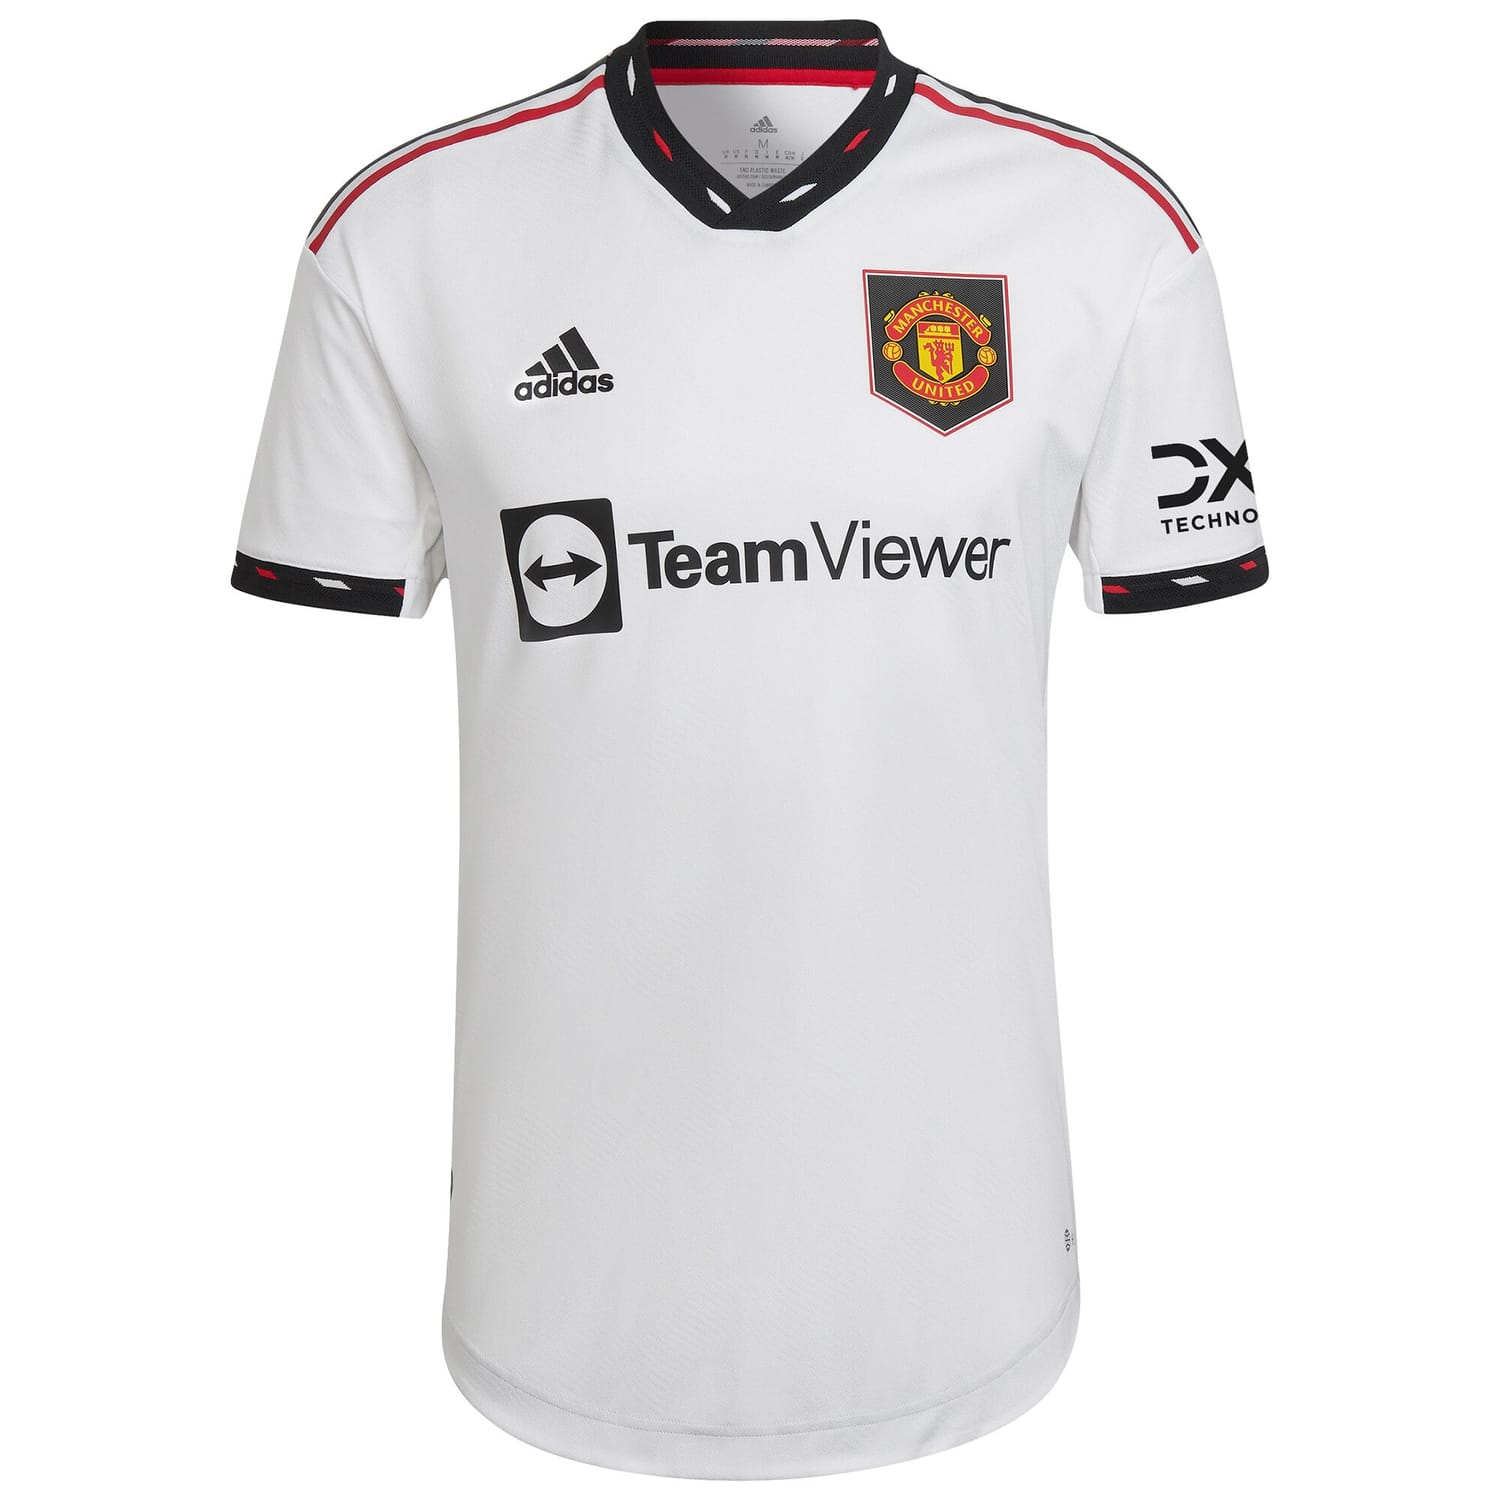 Premier League Manchester United Away WSL Authentic Jersey Shirt 2022-23 player Jayde Riviere 14 printing for Men